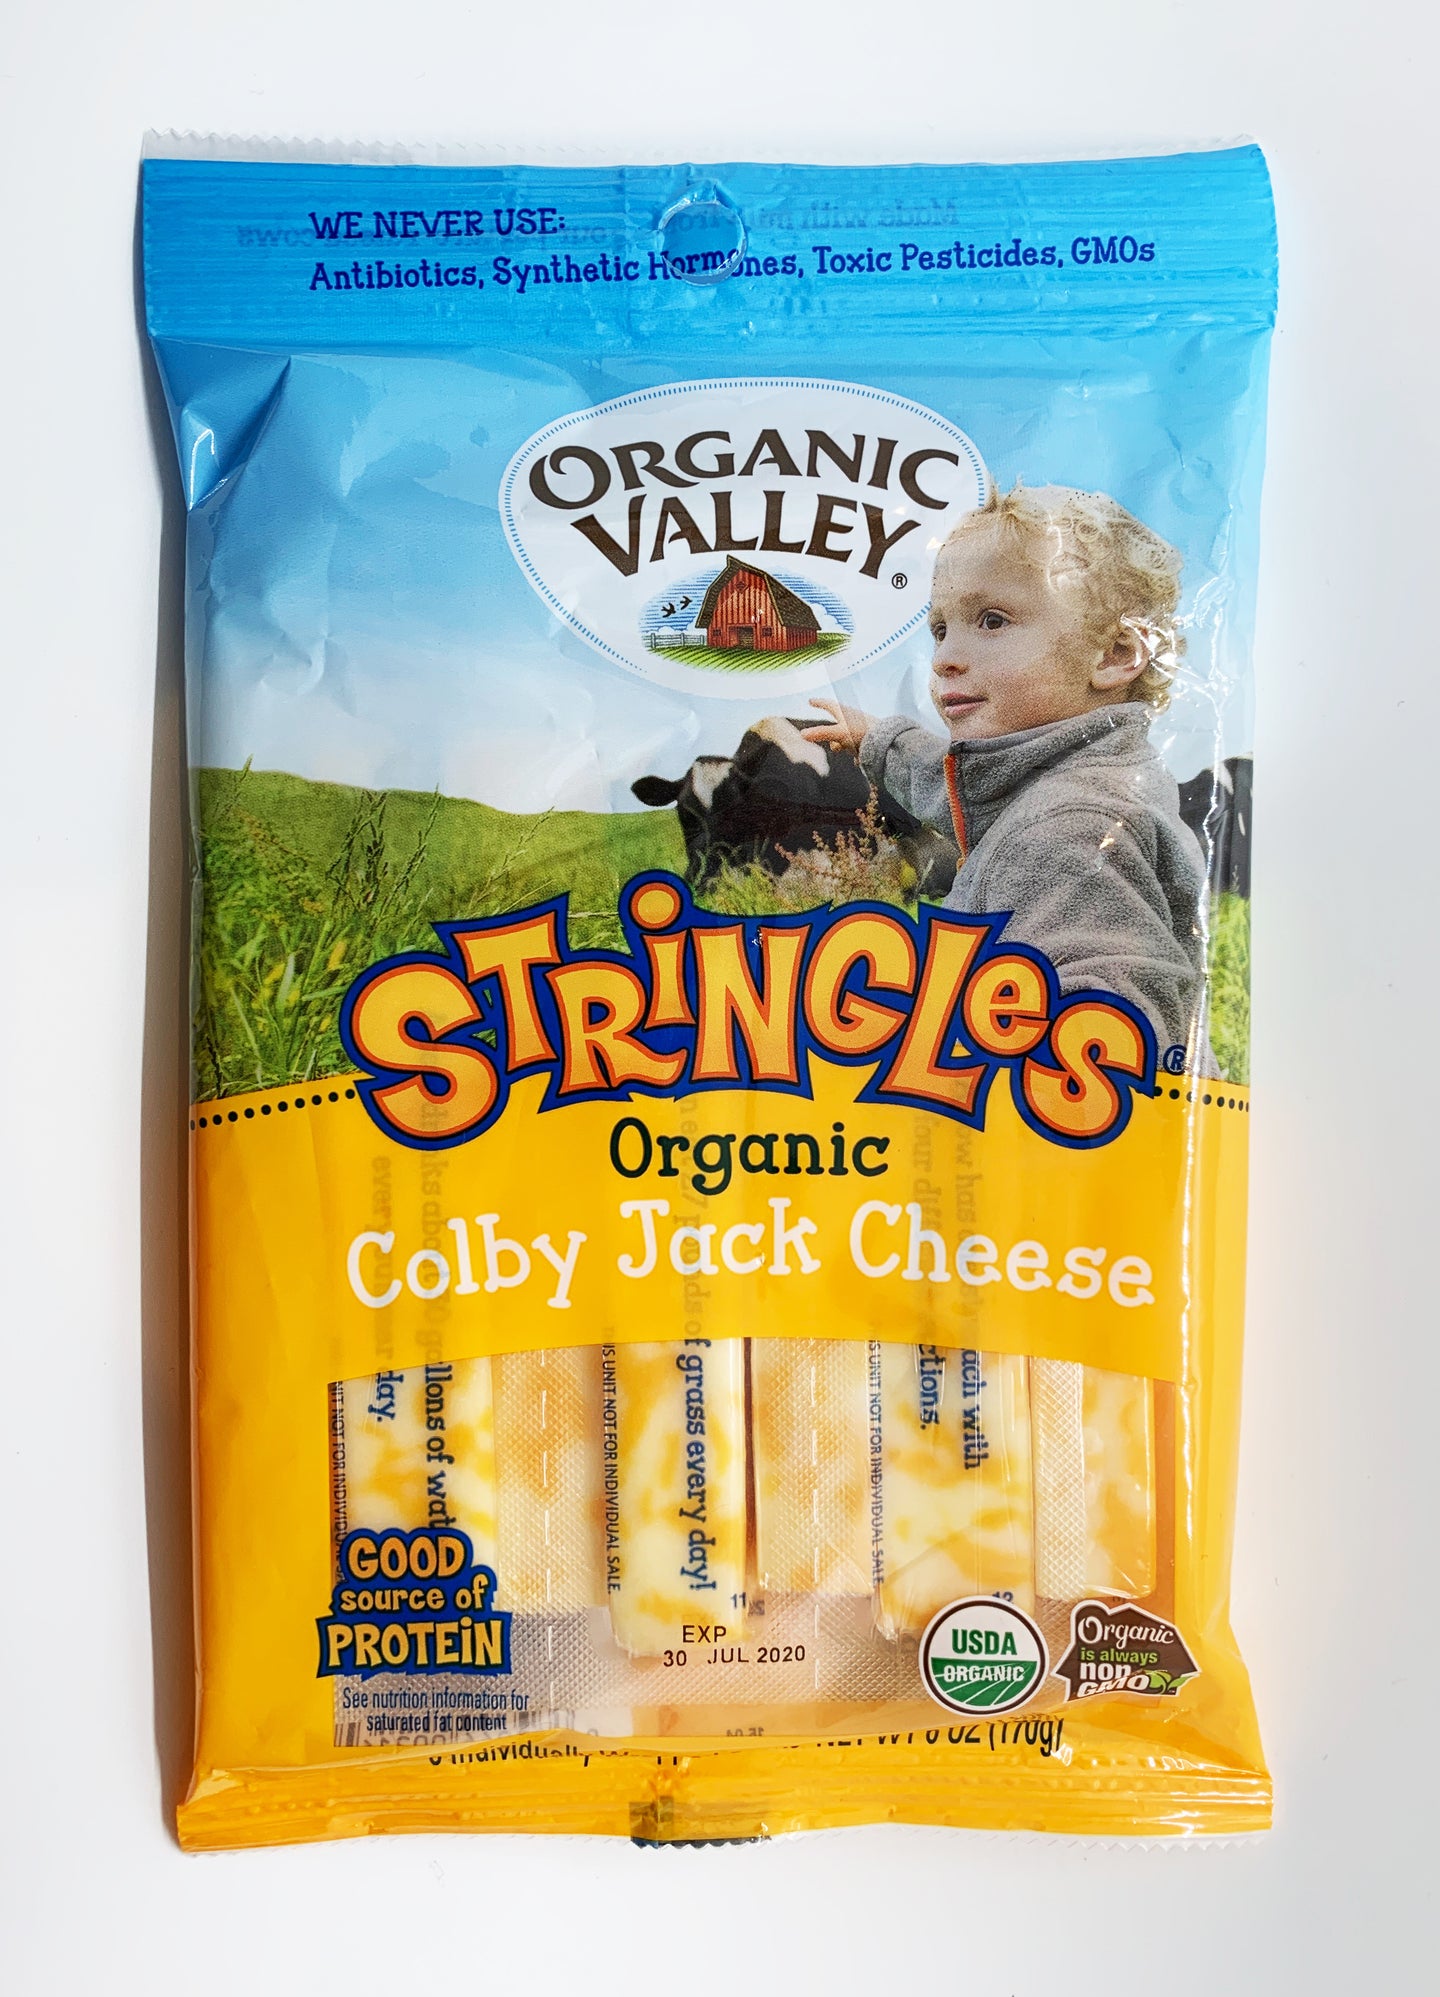 Organic Valley Colby Jack Cheese Stringles